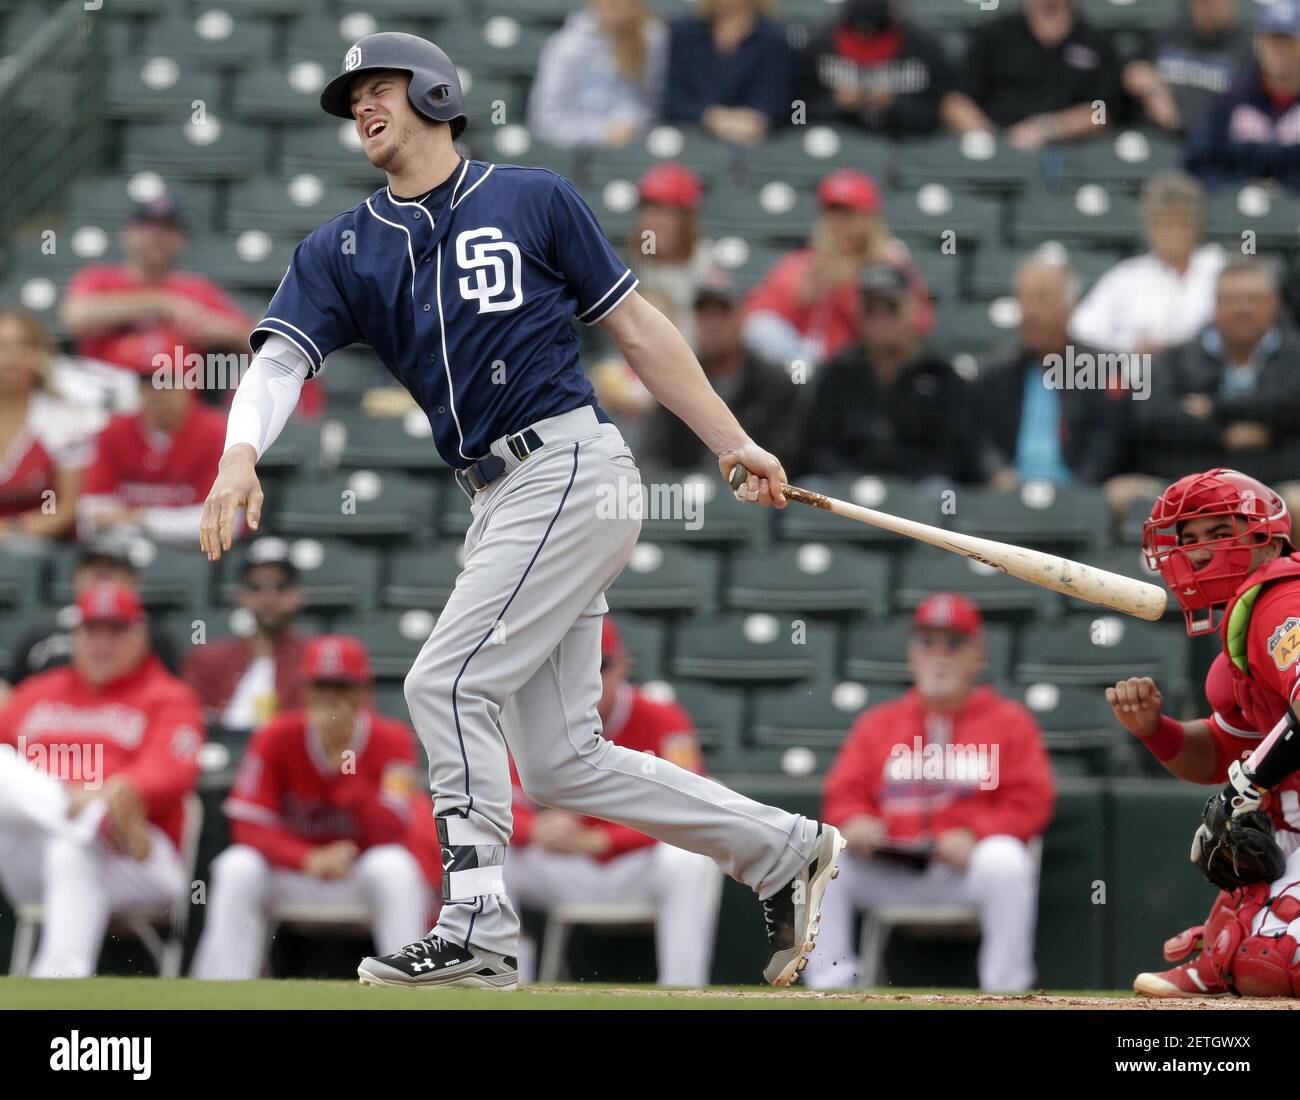 Feb 27, 2017; Tempe, AZ, USA; San Diego Padres first baseman Wil Myers (4) reacts after fouling off a pitch in the first inning during a spring training game against the Los Angeles Angels at Tempe Diablo Stadium. Mandatory Credit: Rick Scuteri-USA TODAY Sports *** Please Use Credit from Credit Field *** Stock Photo